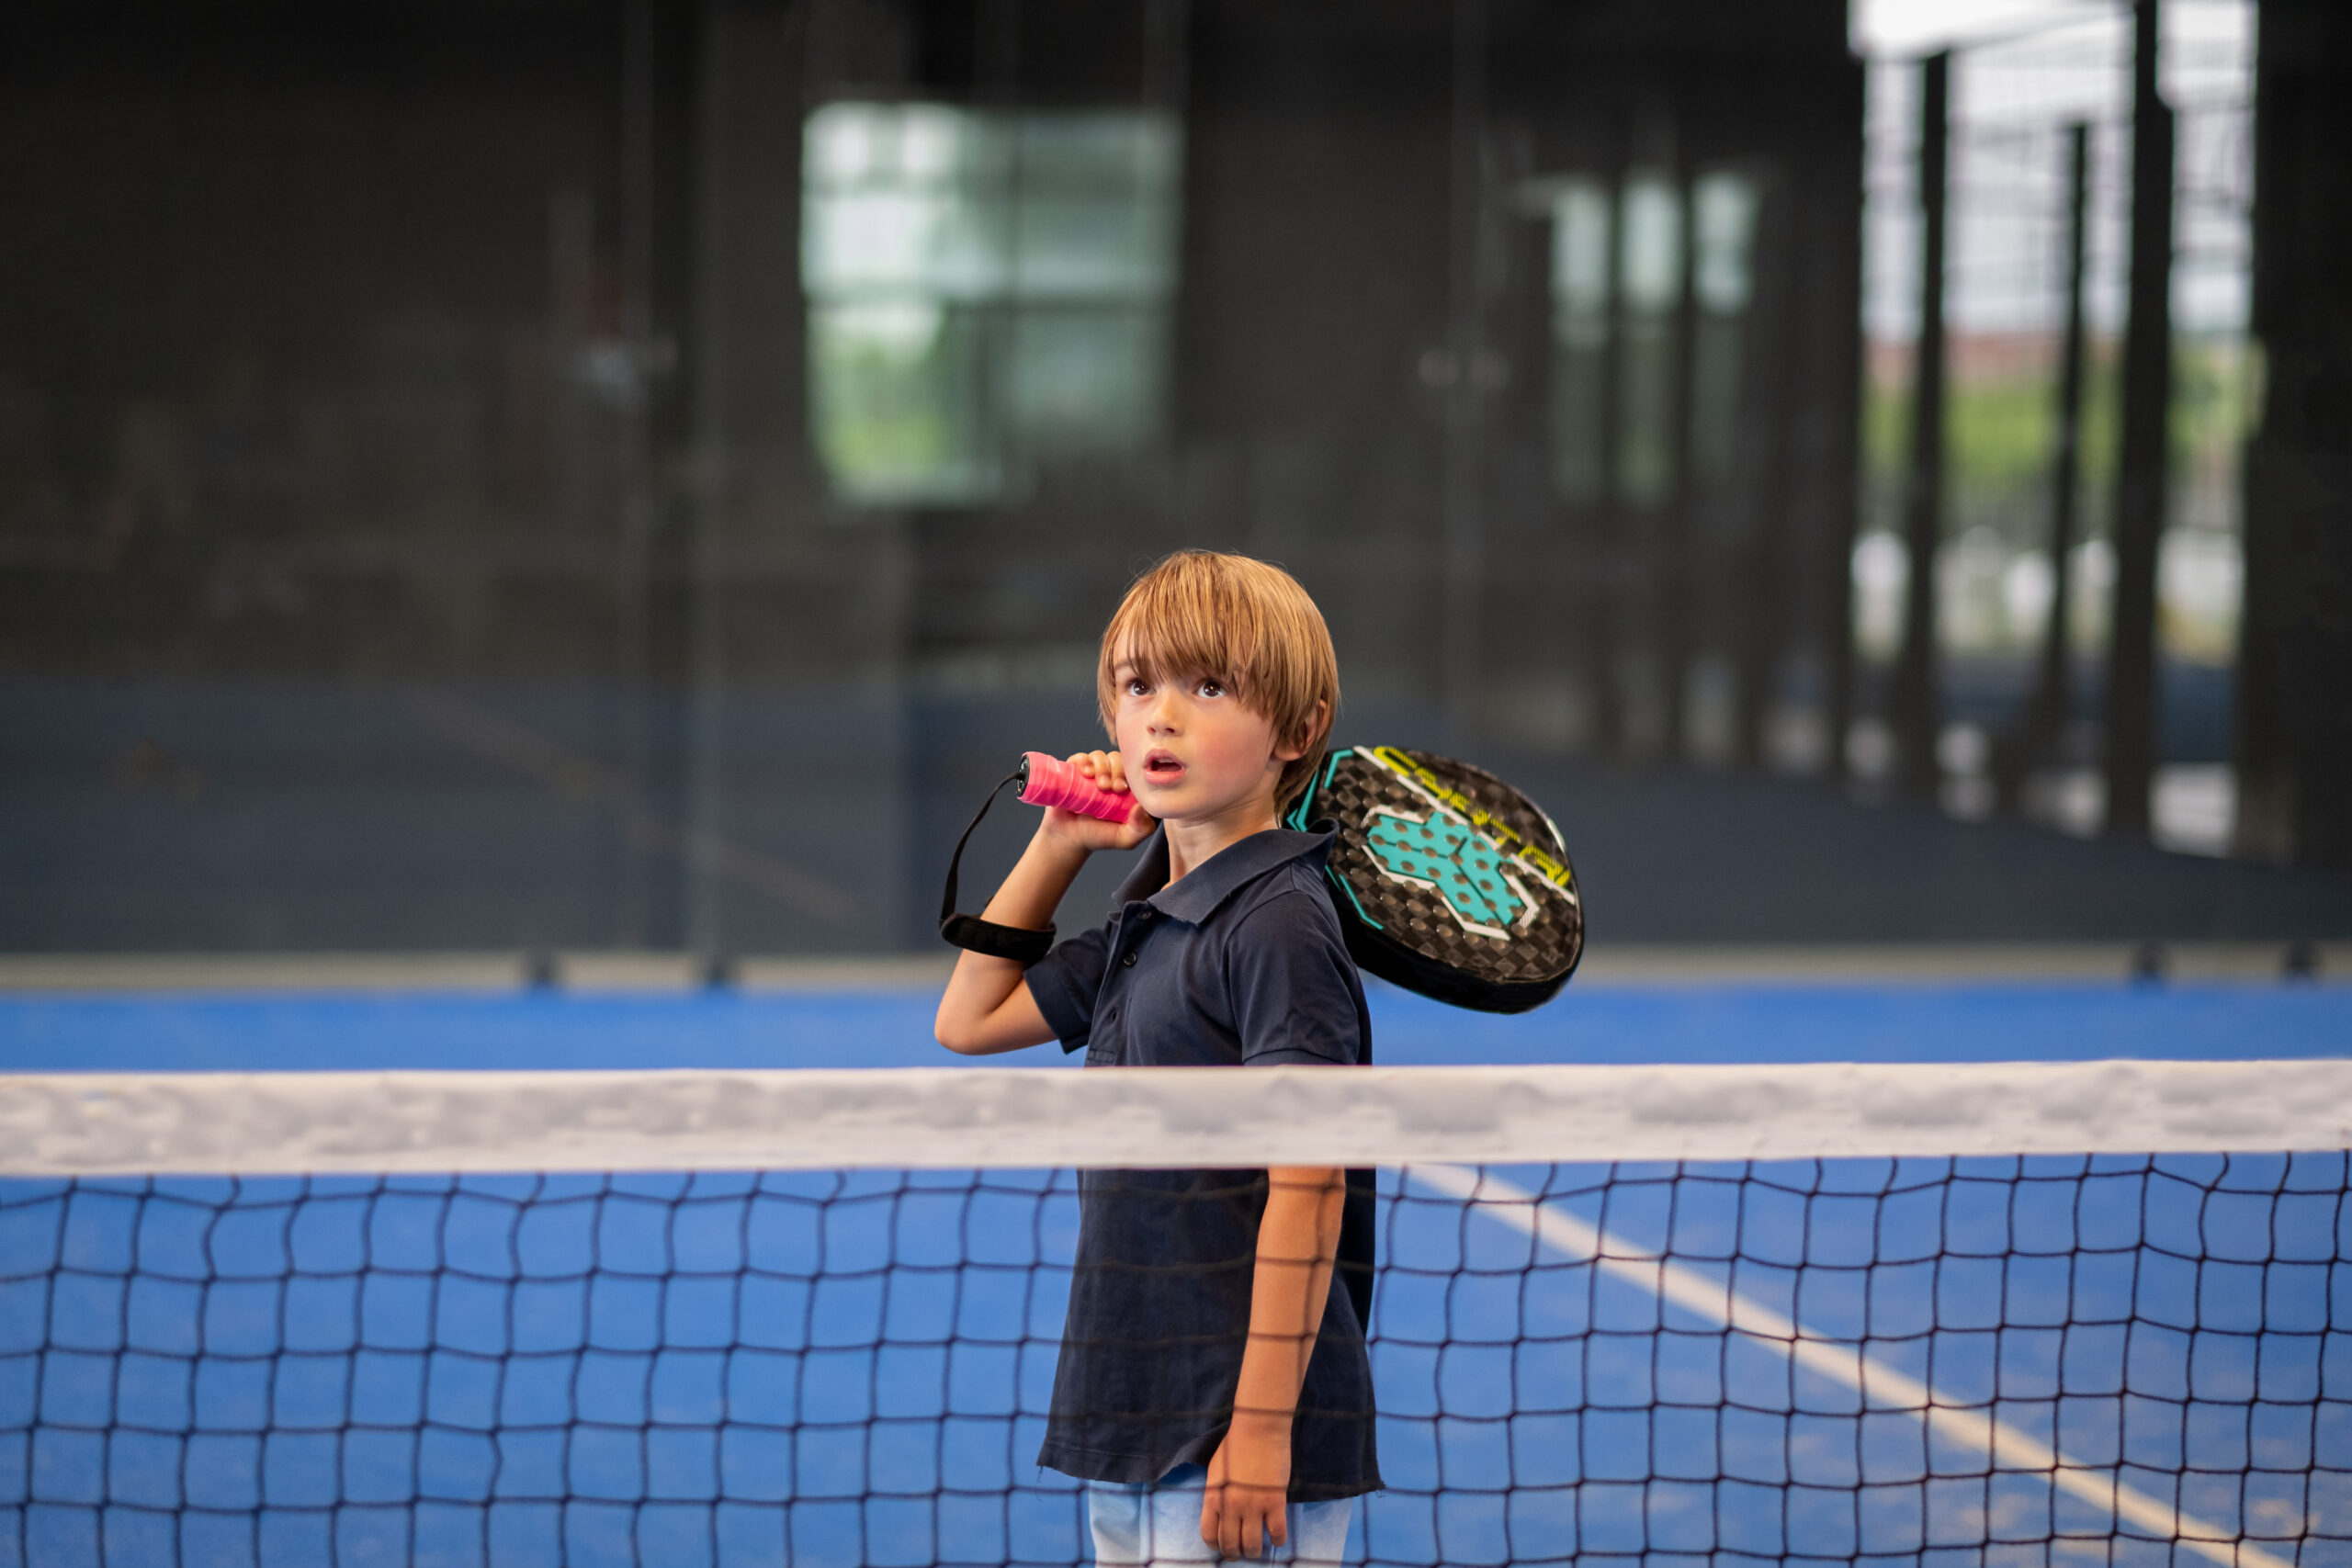 Monitor teaching padel class to child, his student - Trainer tea